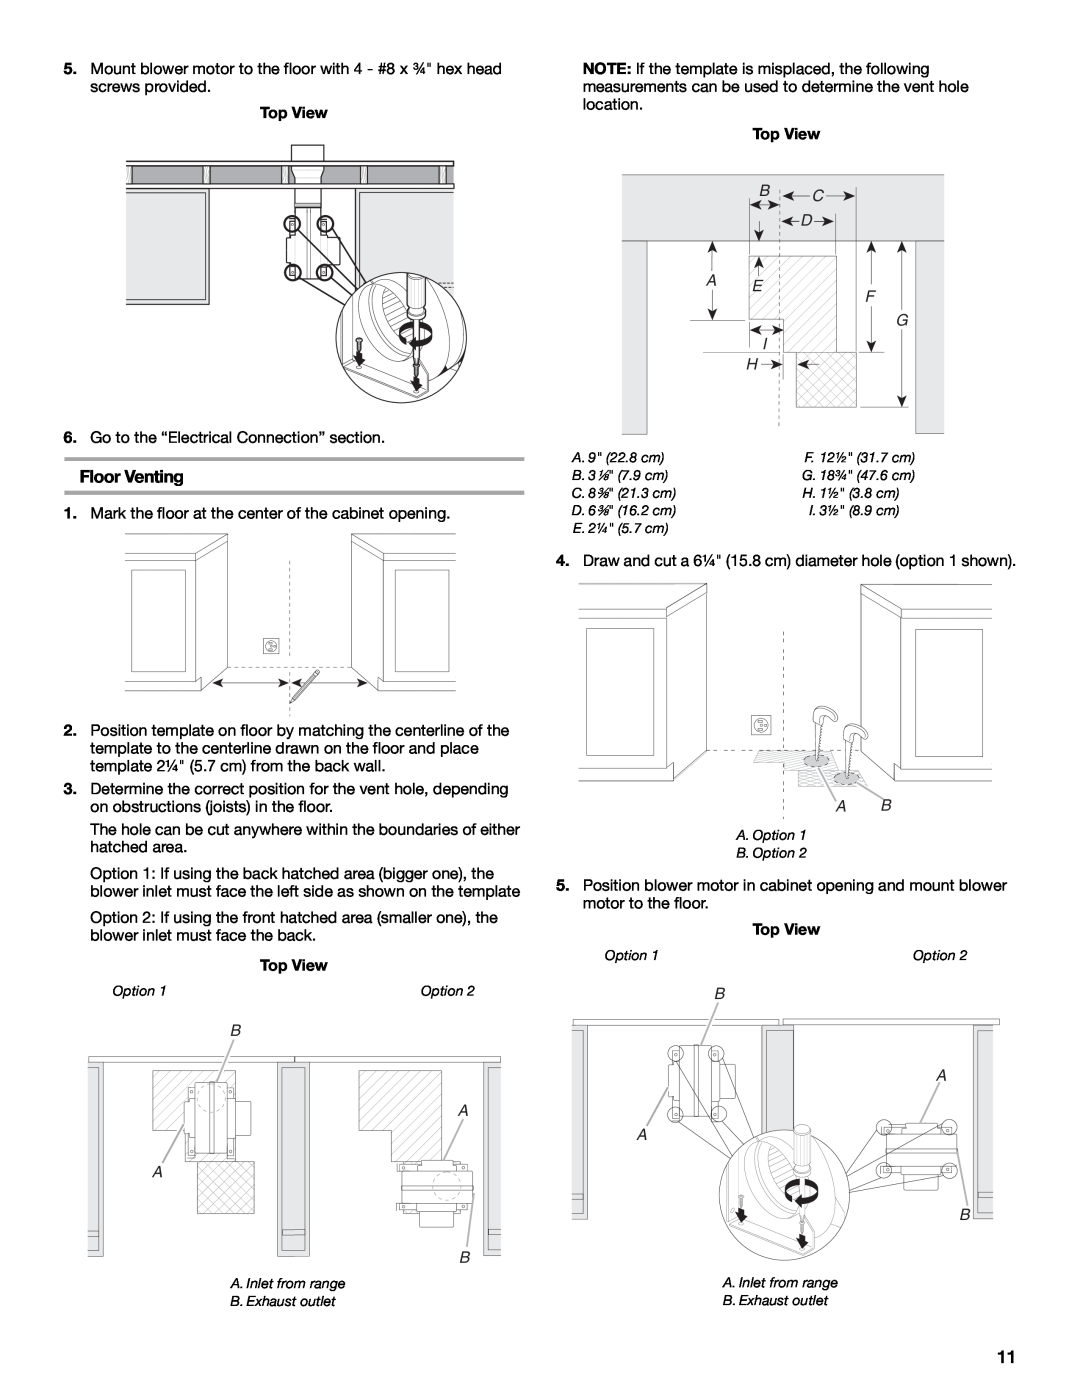 Jenn-Air W10253462A installation instructions B A A B, Floor Venting, Go to the “Electrical Connection” section 